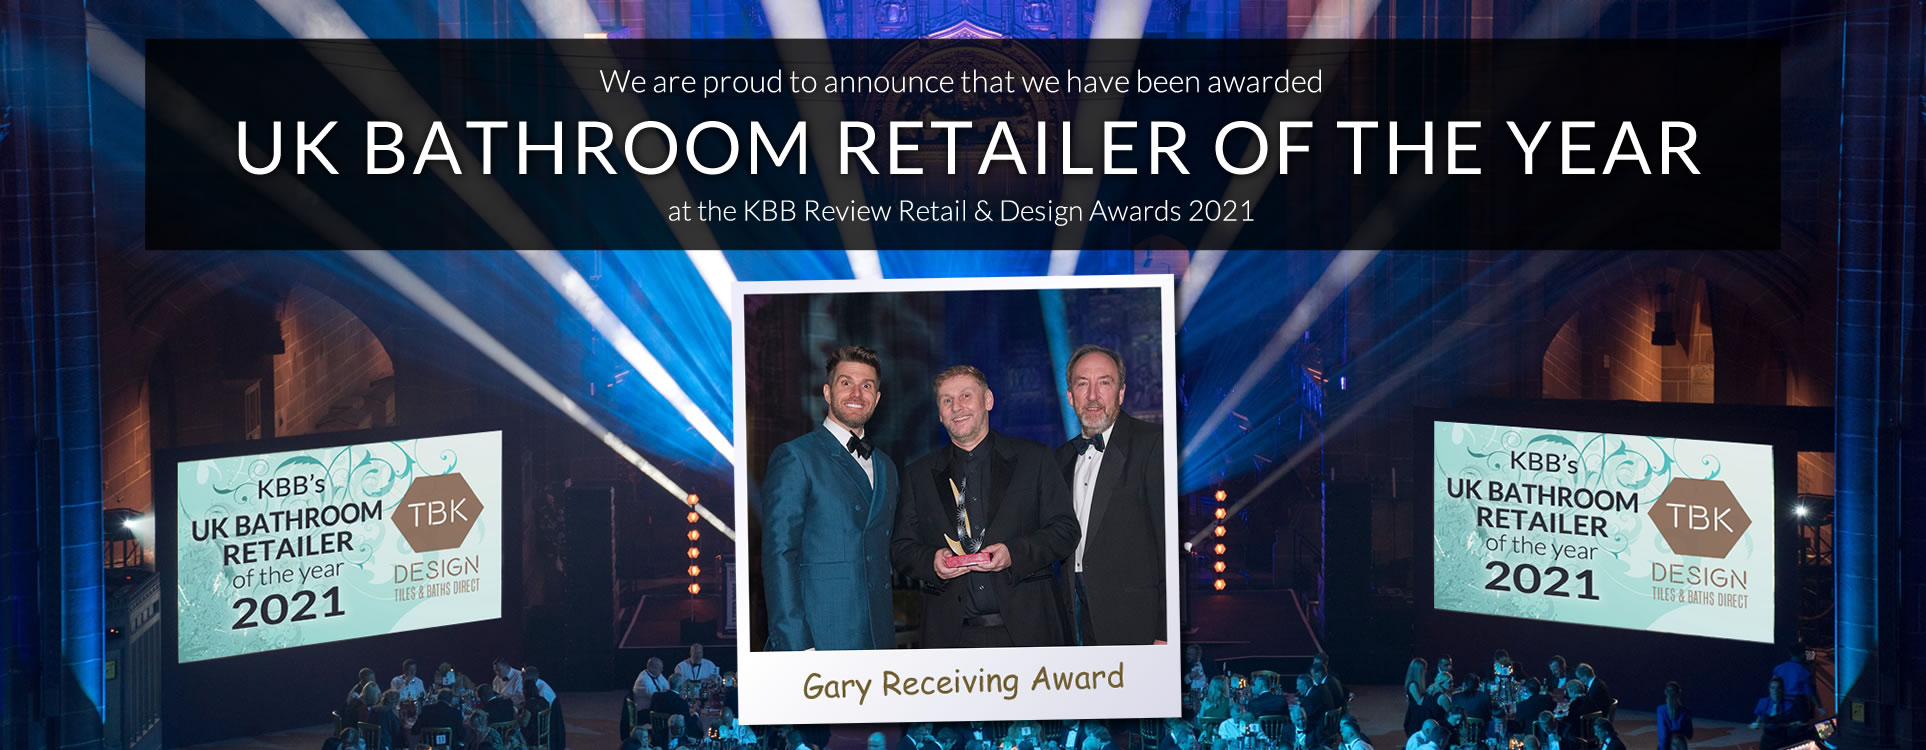 We are proud to announce that we have been awarded UK Bathroom Retailer of the Year at the KBB Review Retail & Design Awards 2021